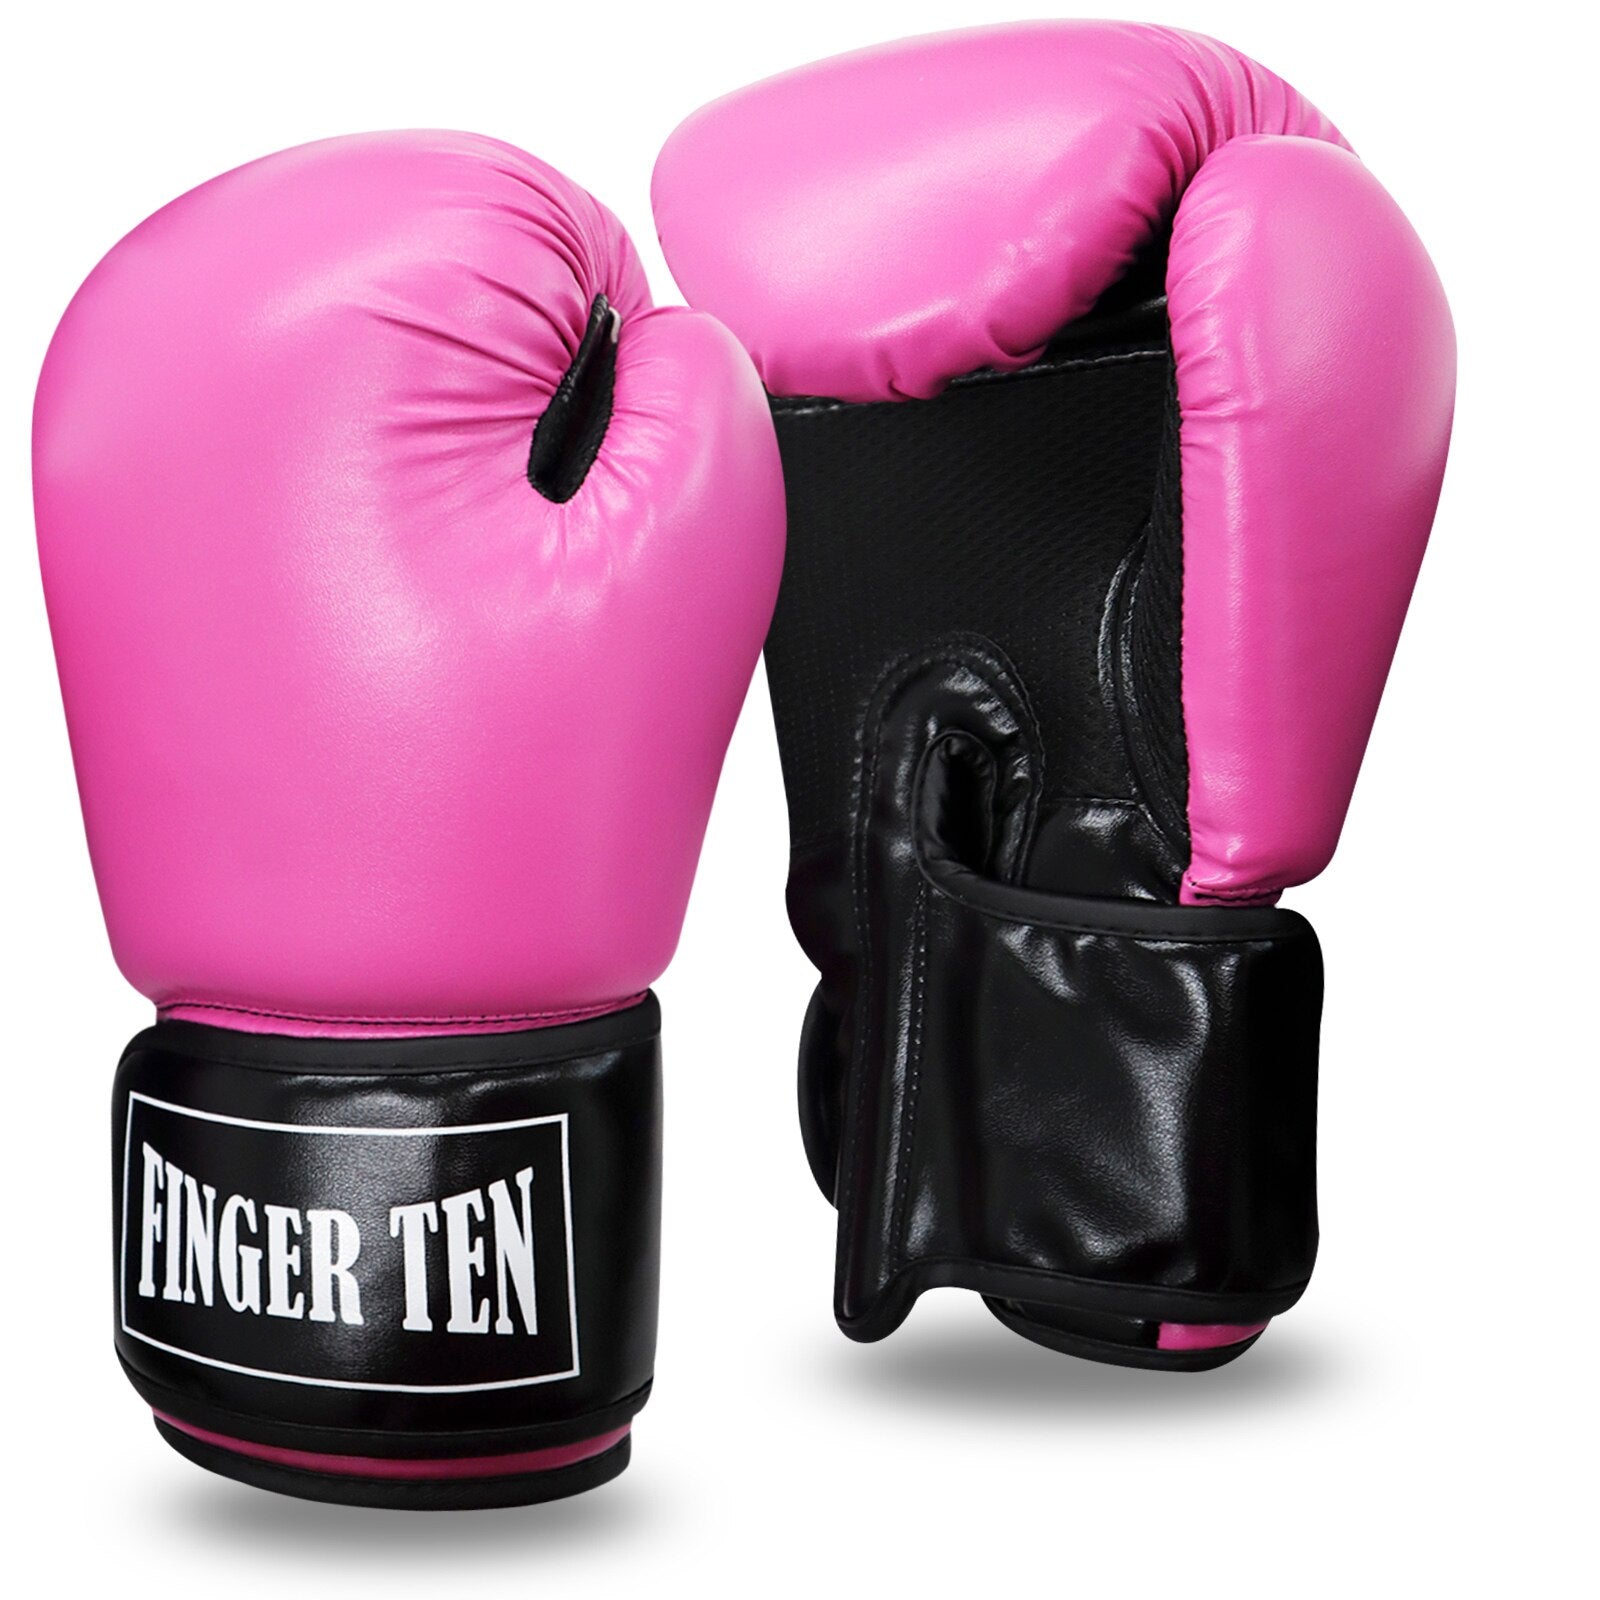 New Training Protector Boxing Gloves for Women